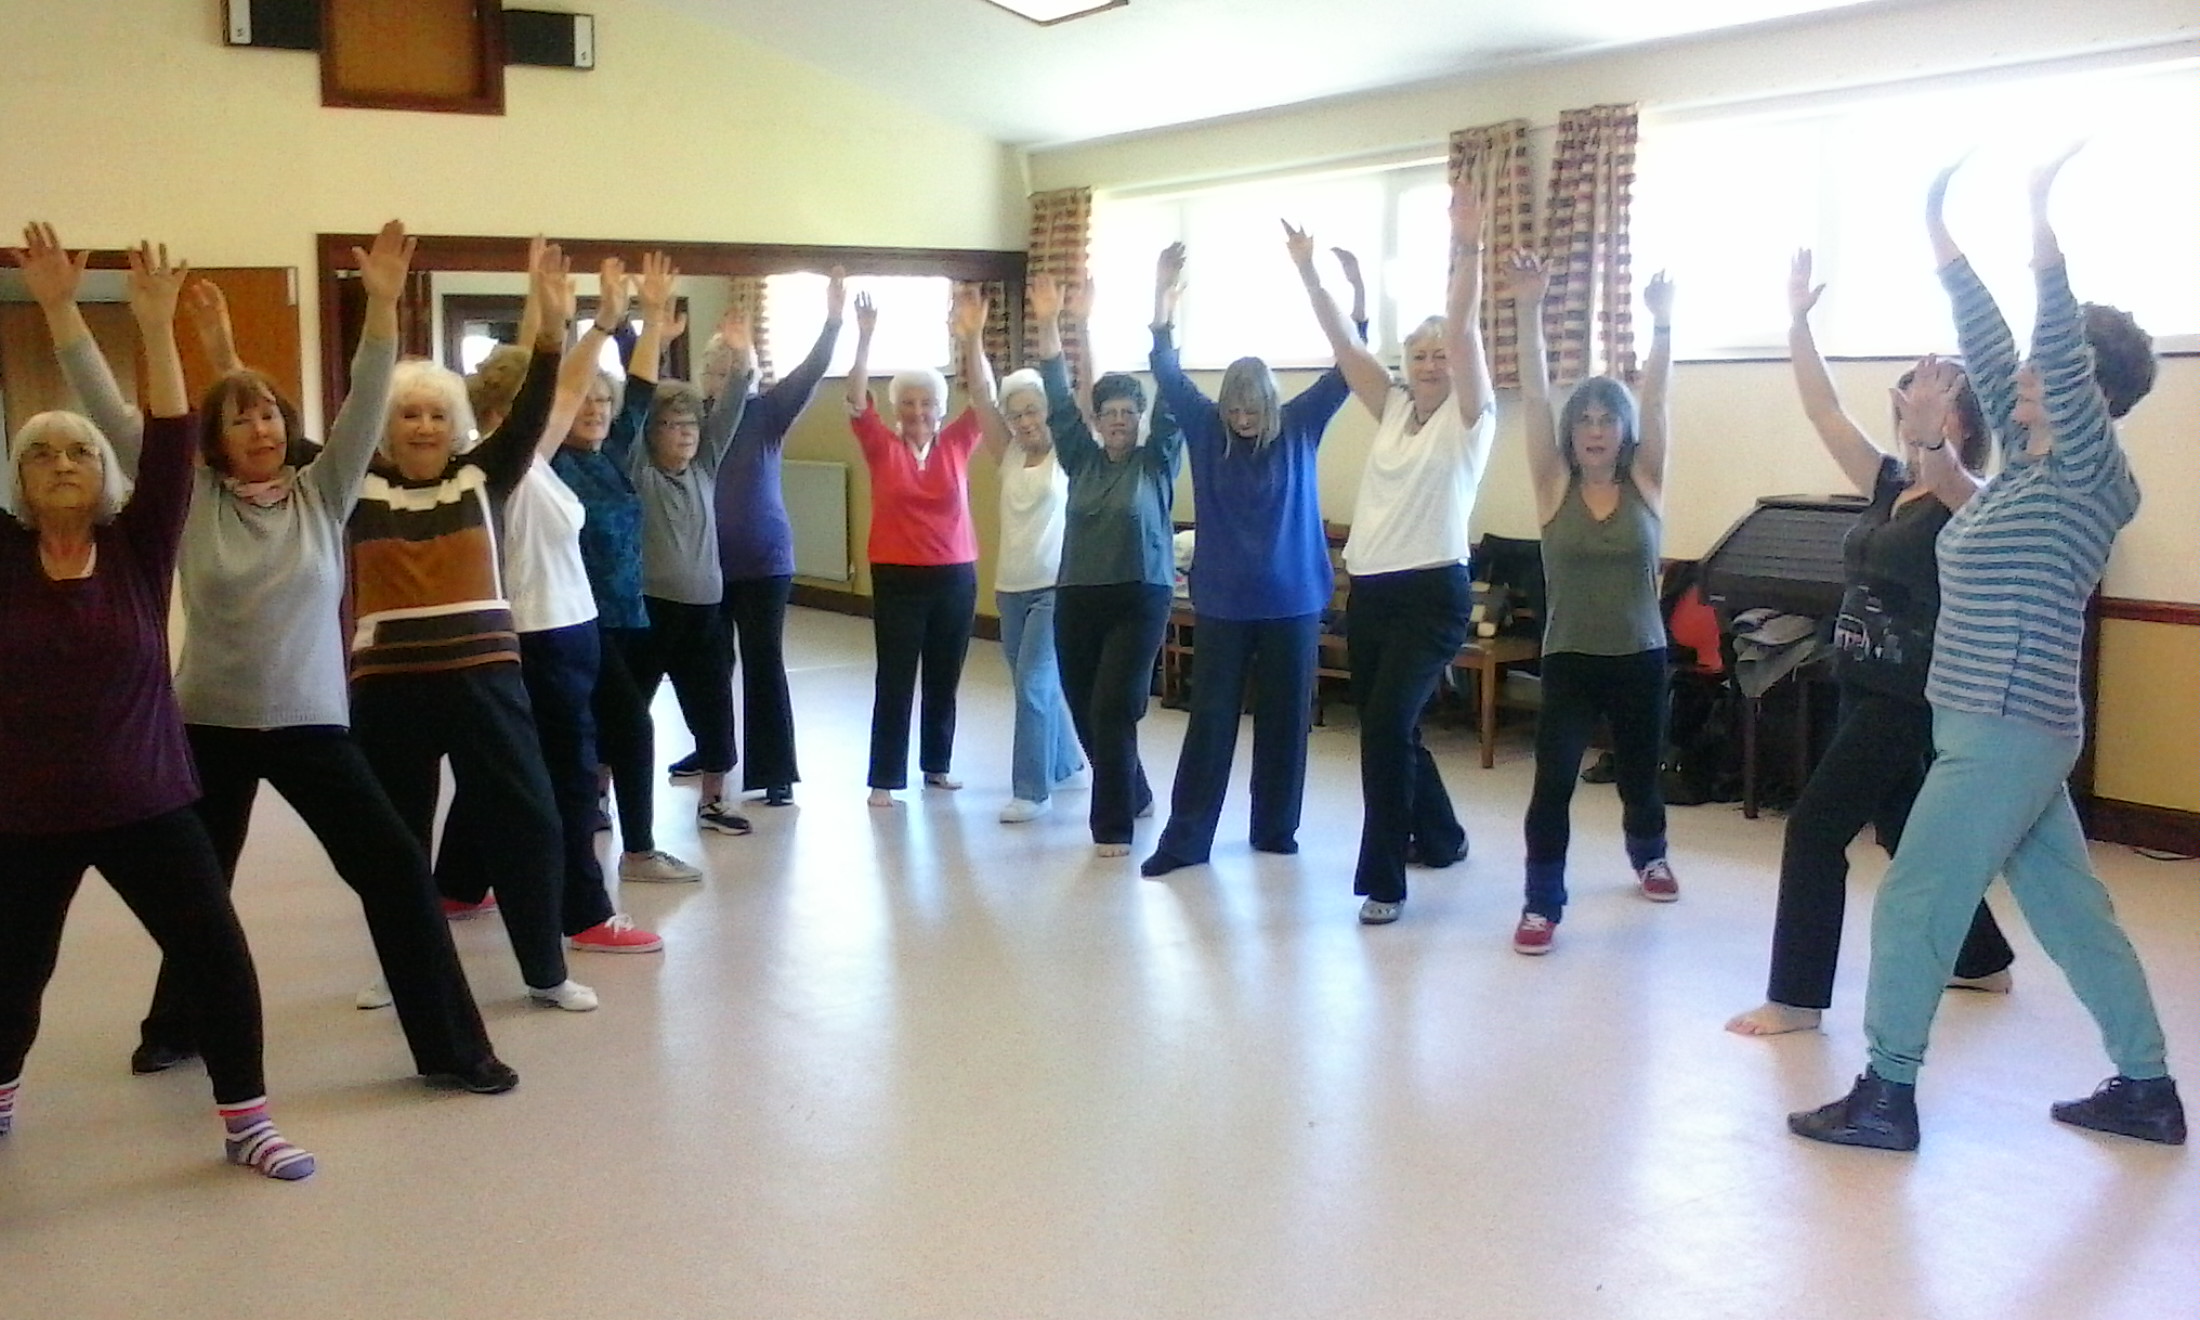 LET'S DANCE! CROSS CULTURAL MOVES FOR THE OVER 50S